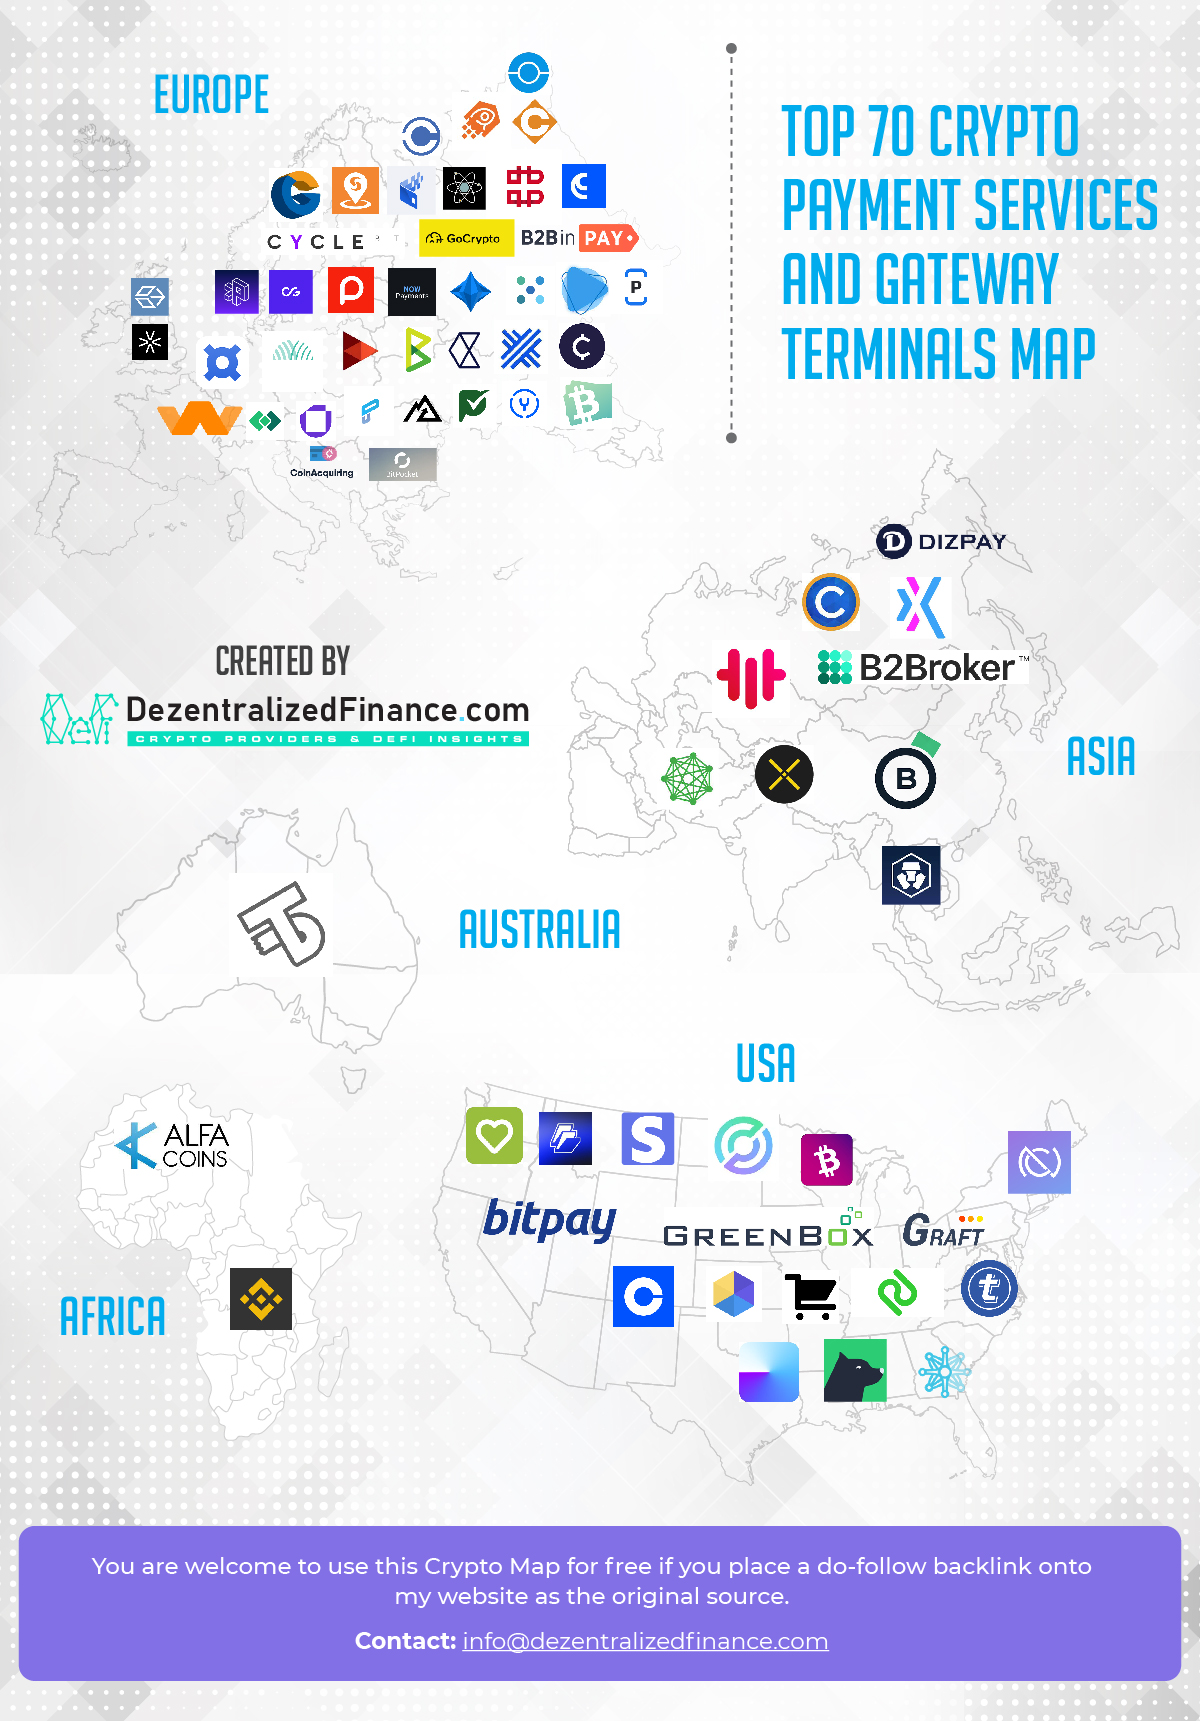 Top-70-Crypto-Payment-Services-and-Gateway-Terminals